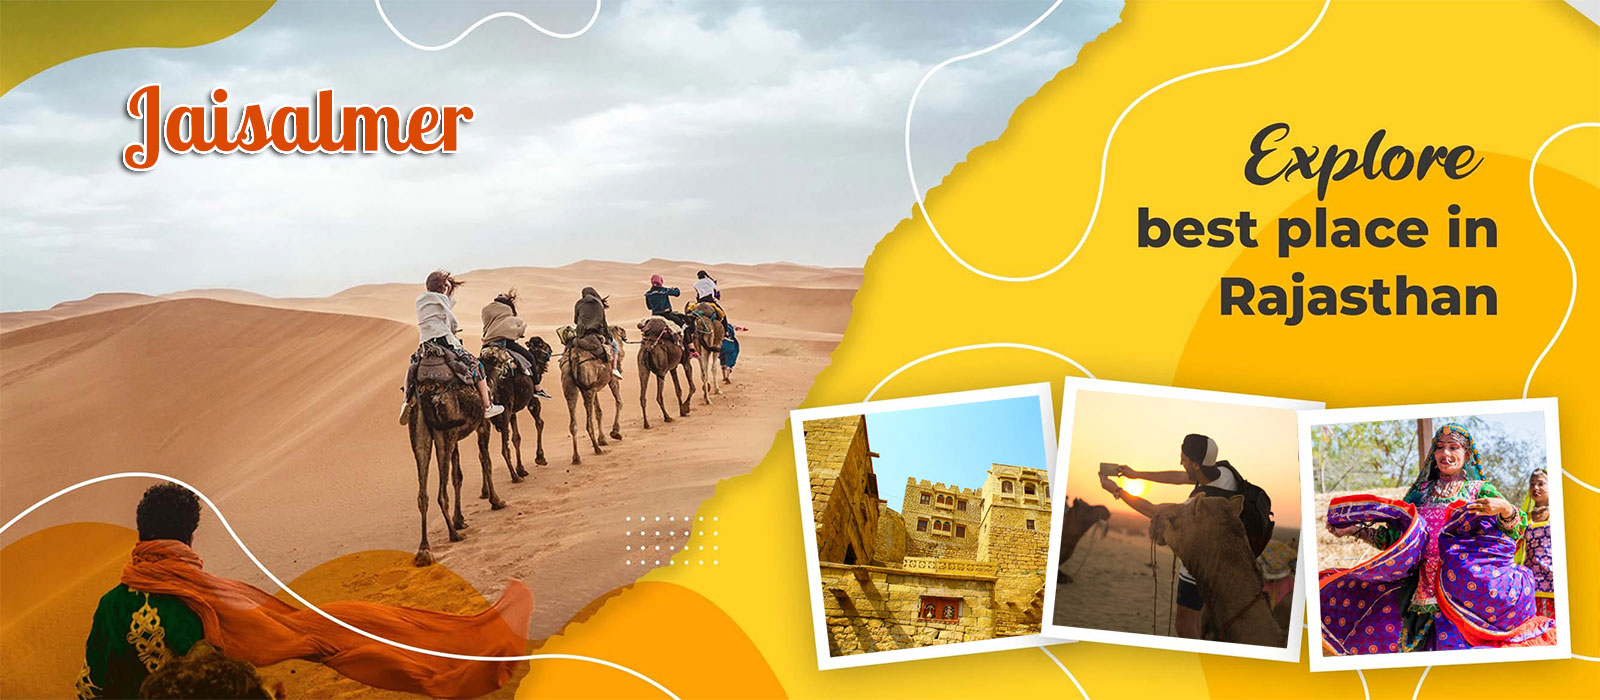 "Experience the Royal Heritage of Jaisalmer with our Luxury Tour Package"